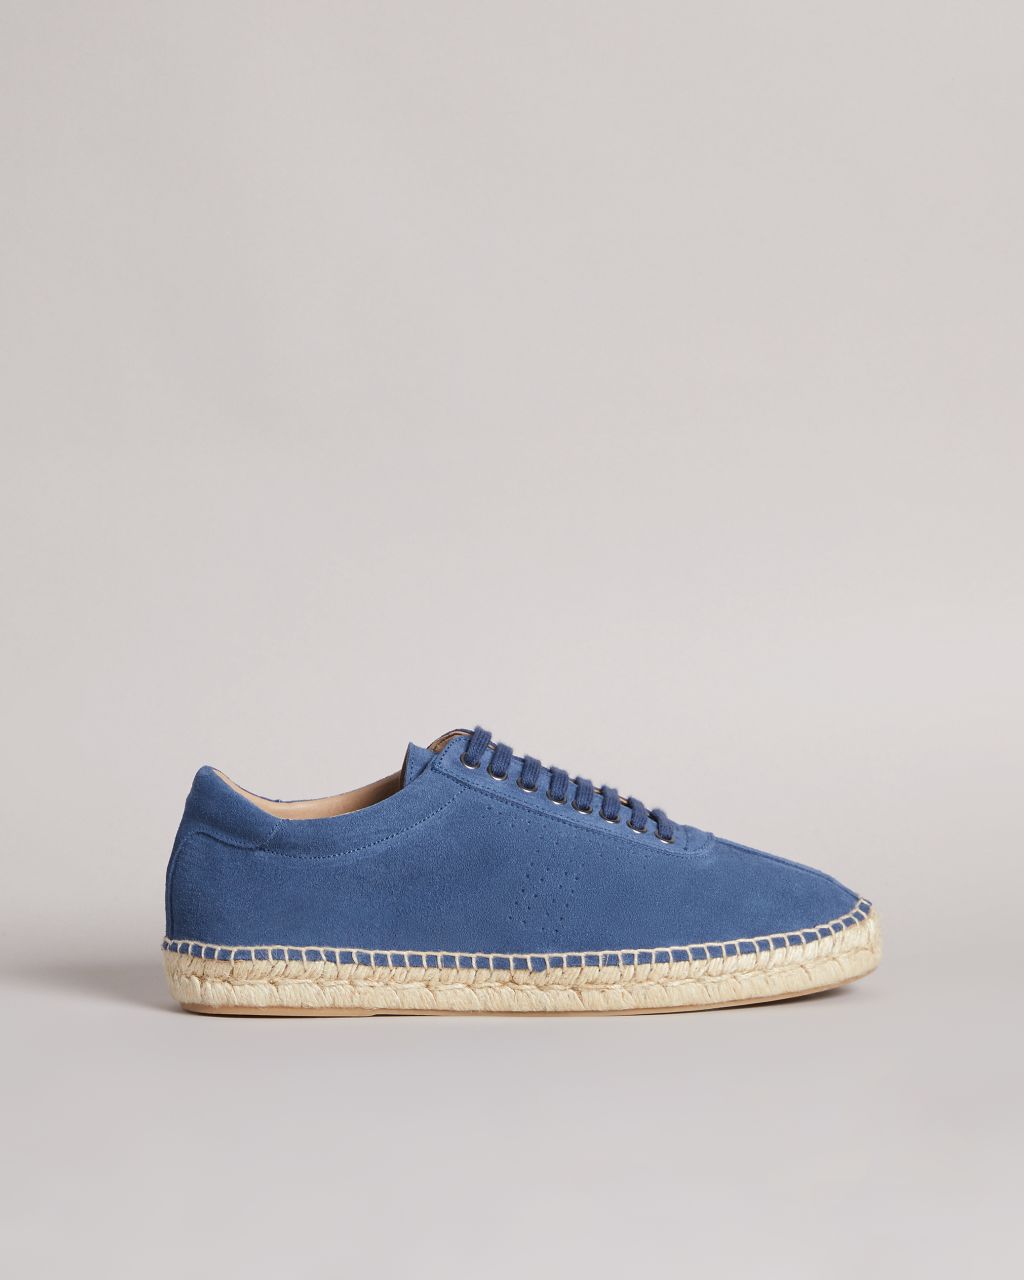 Ted Baker Men's Espadrille Trainers in Blue, Antonn, Leather